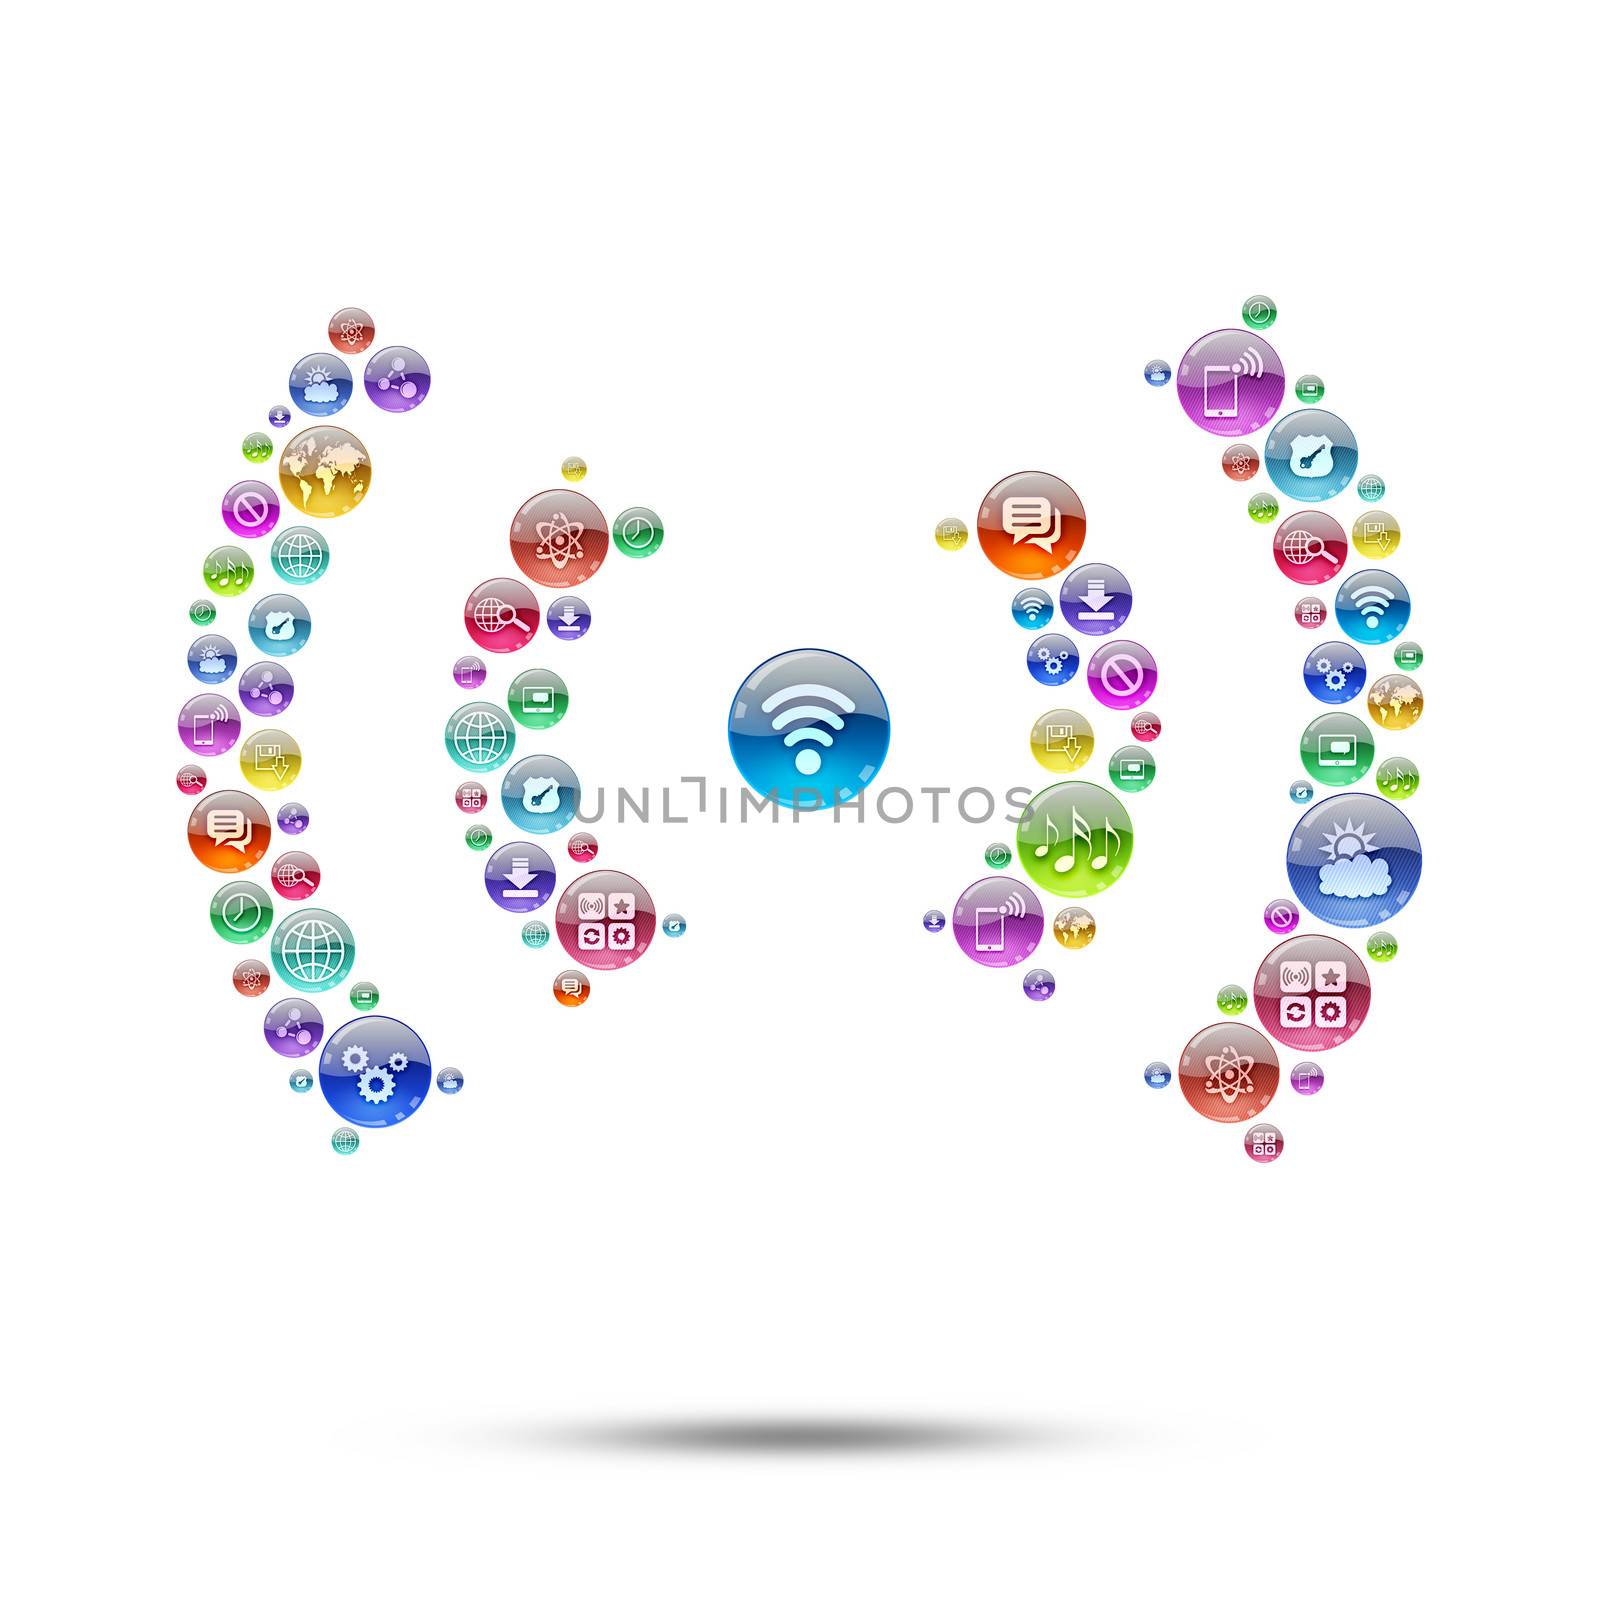 Silhouette wi-fi consisting of apps icons. The concept software